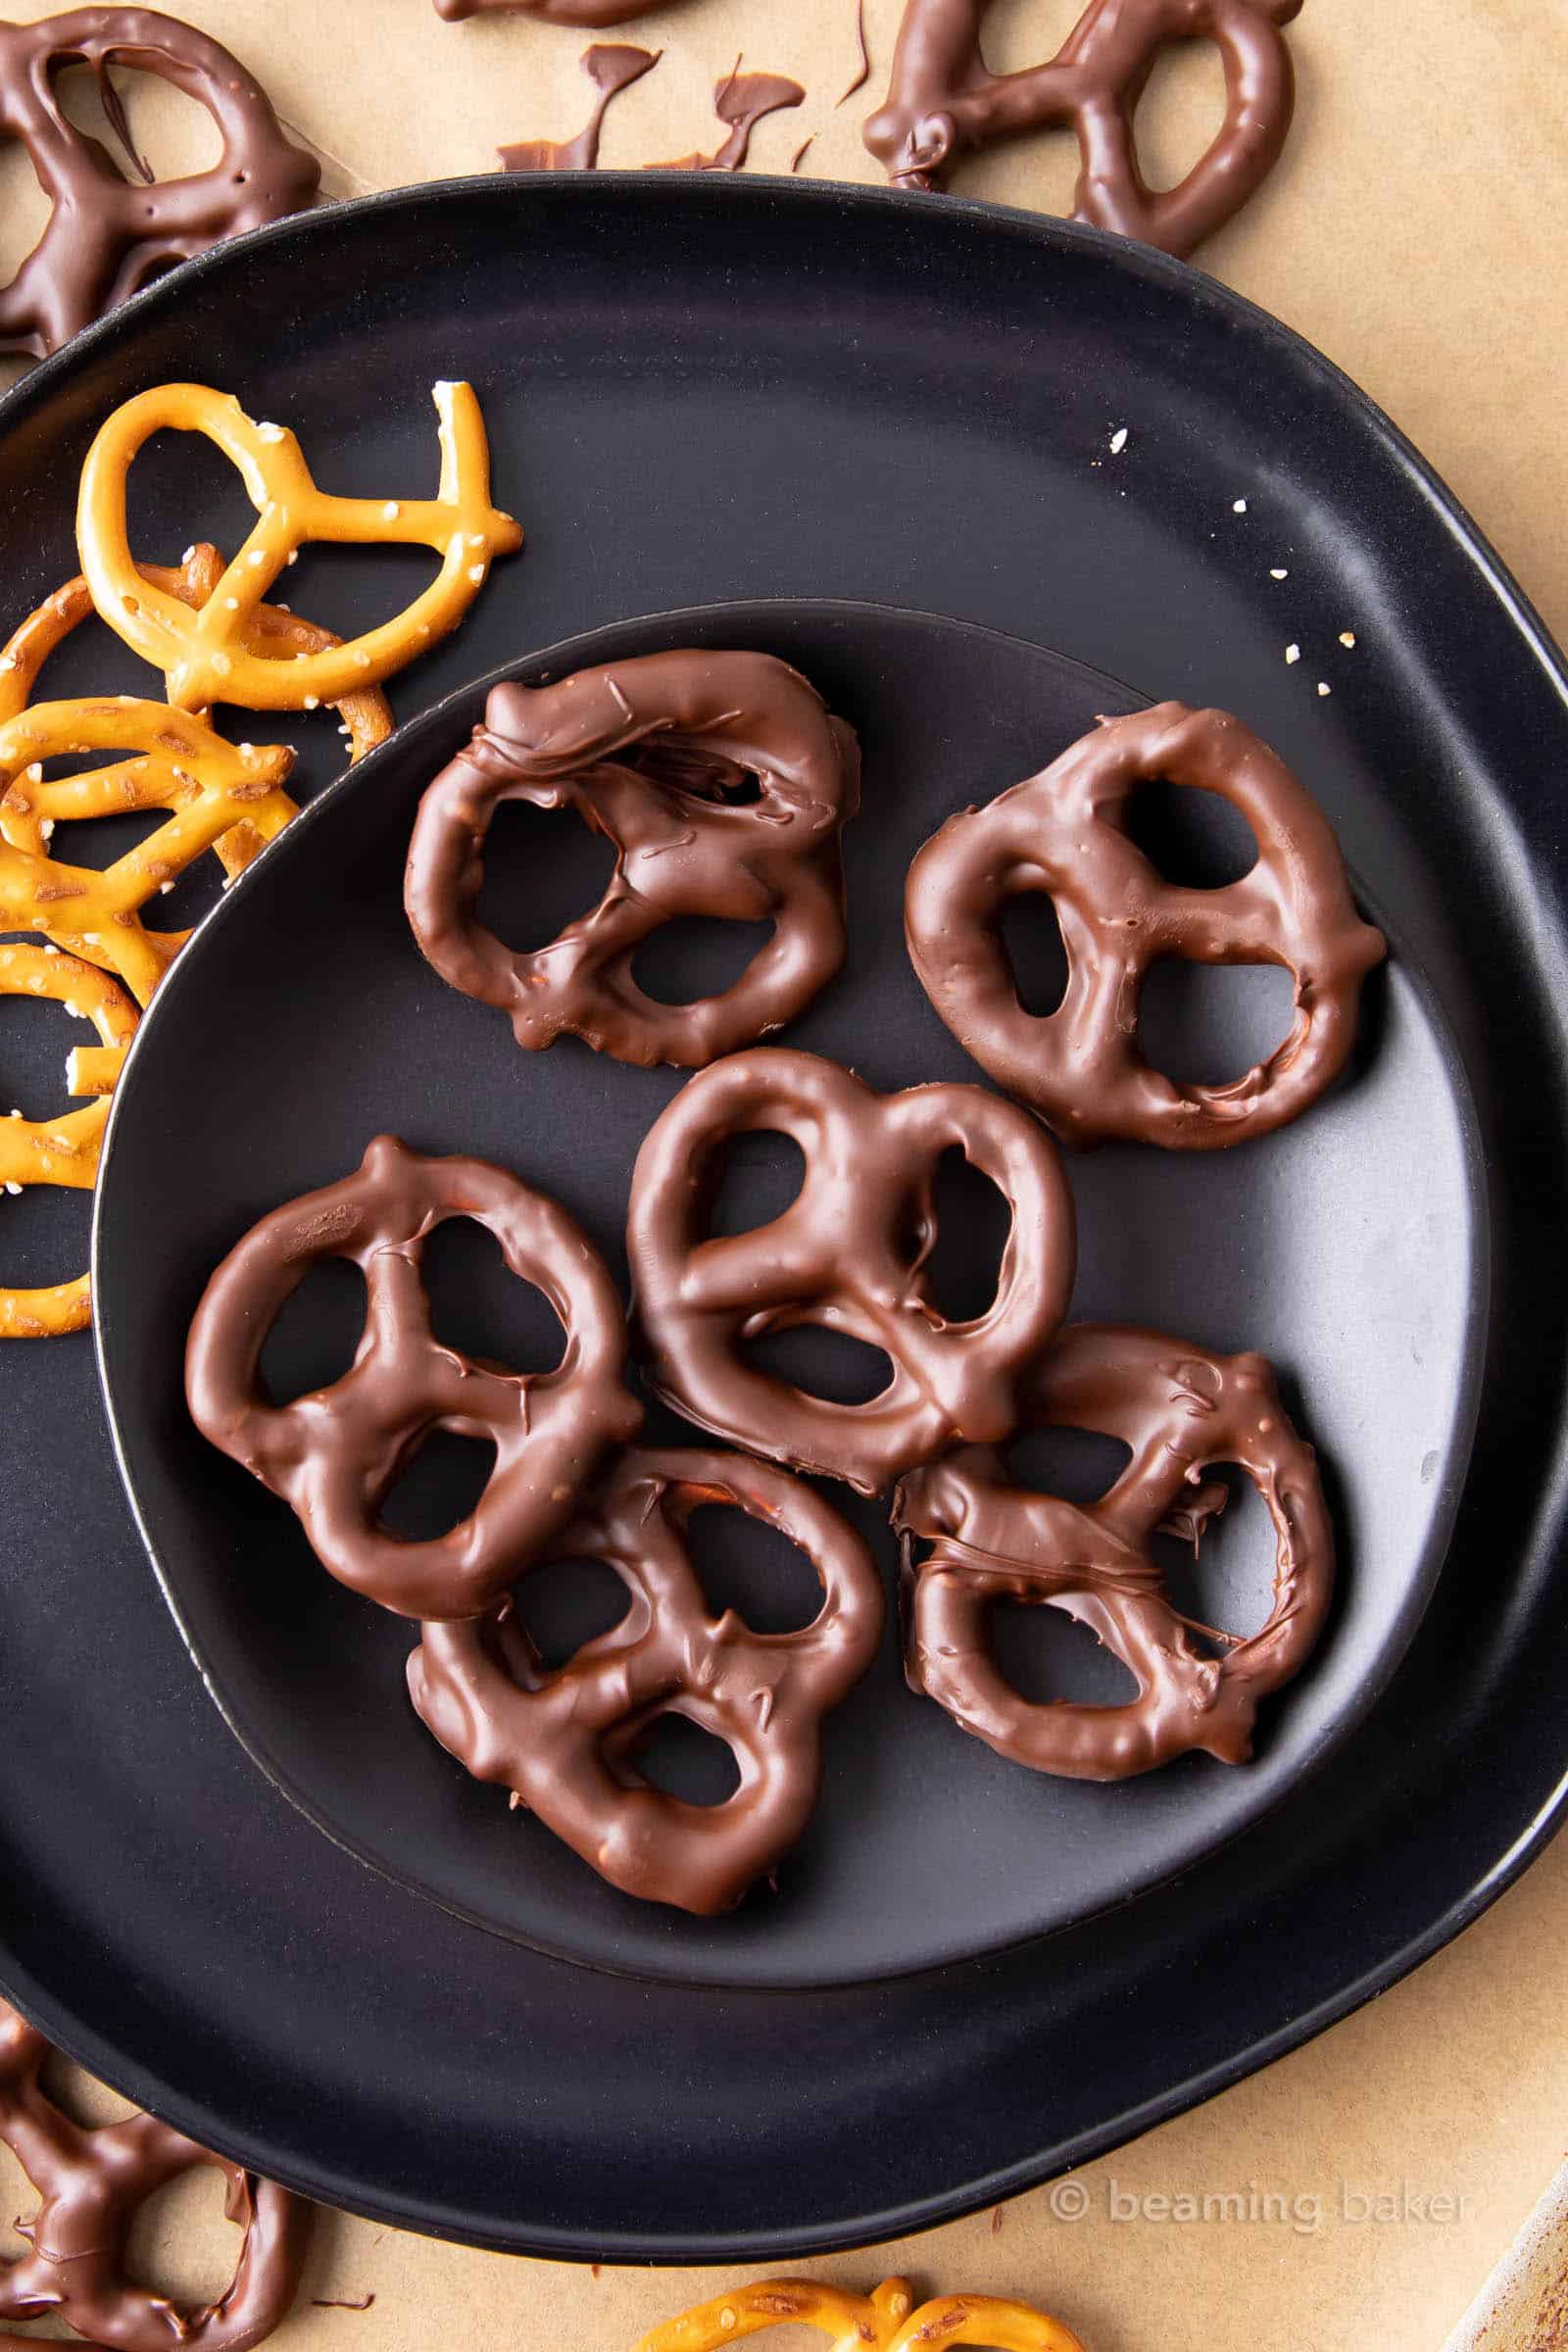 Vegan chocolate covered pretzels on a black plate with more pretzels